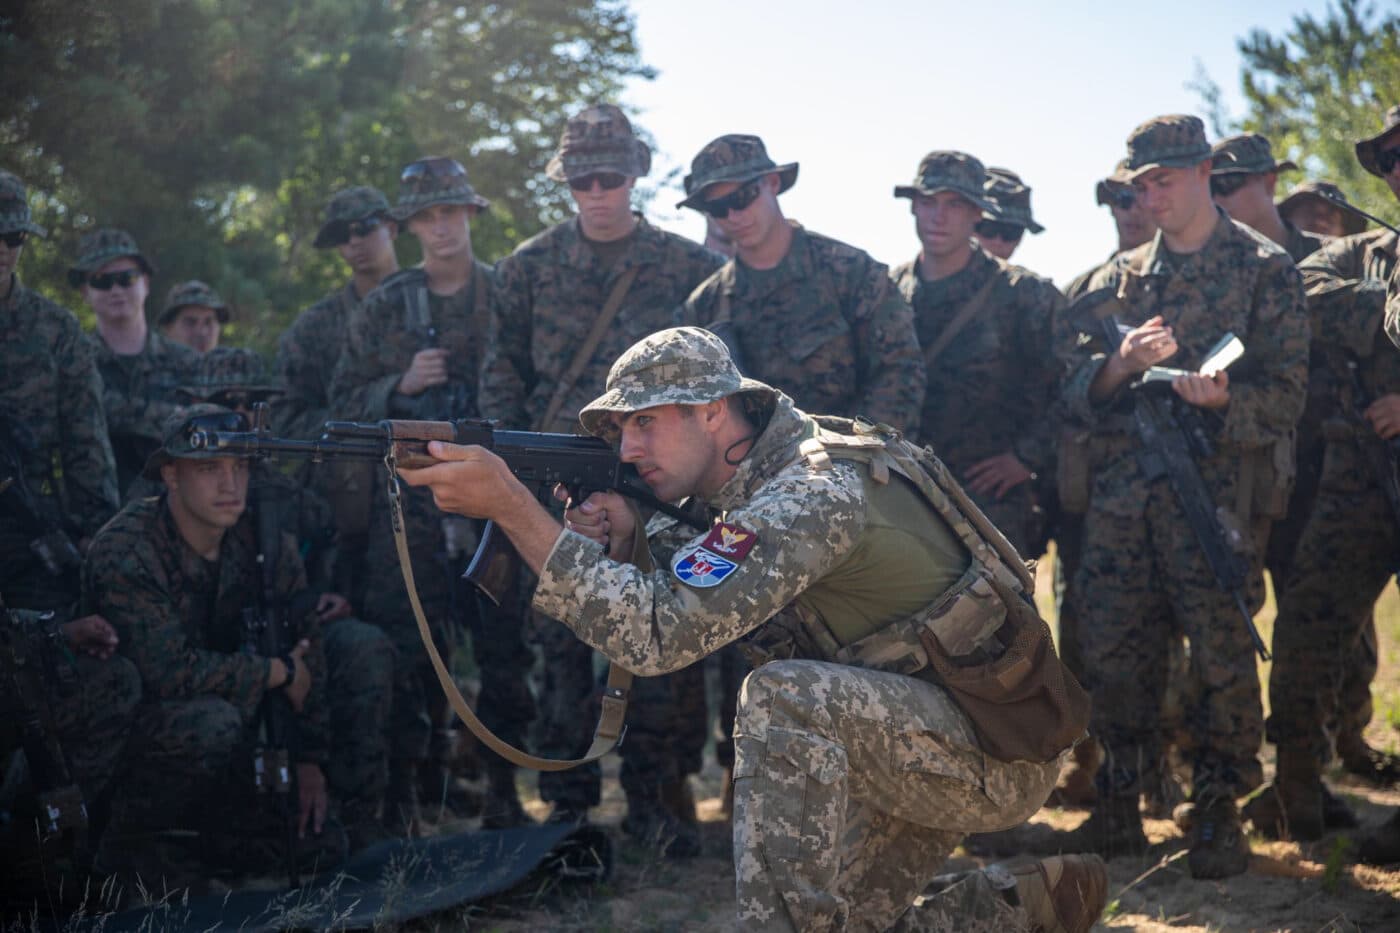 A Ukrainian soldier shows U.S. Marines rifle techniques with the AK-74 weapon system during Exercise Sea Breeze 21 on June 29, 2021